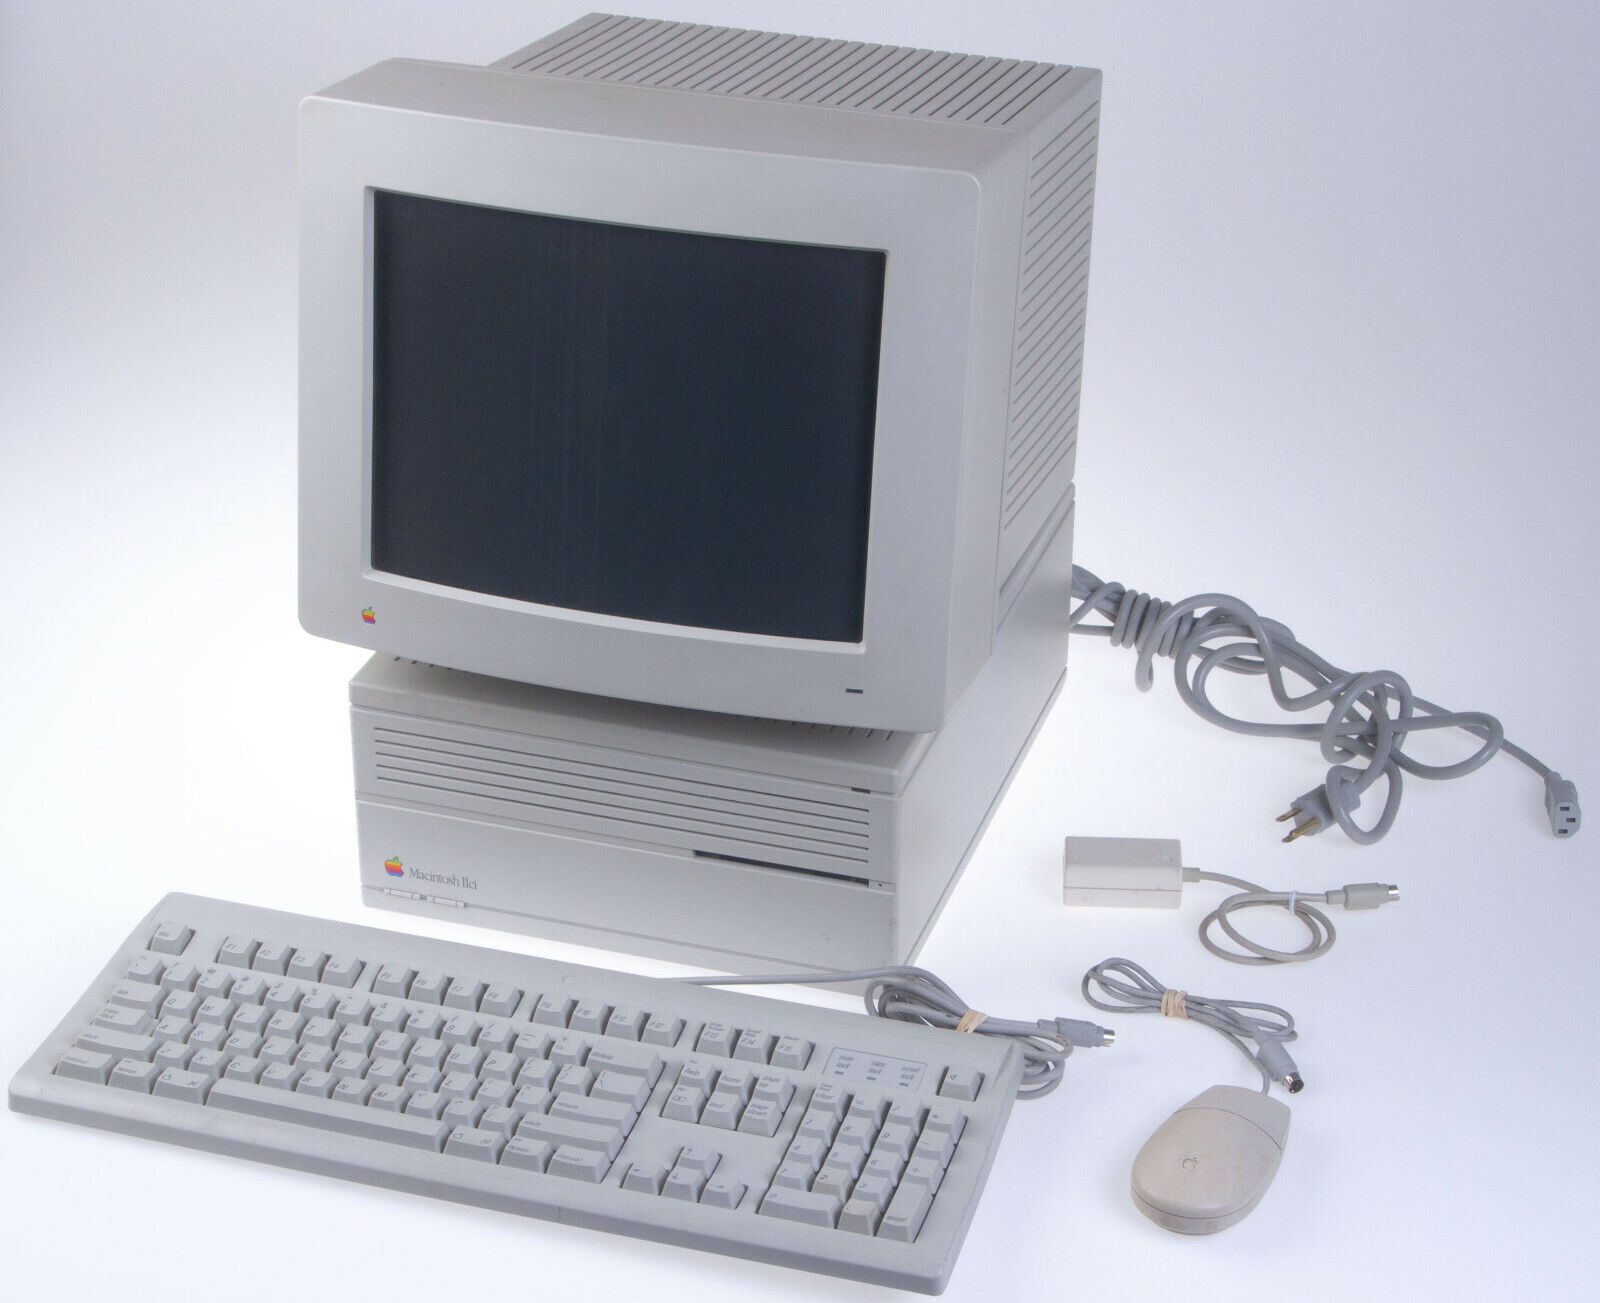 Apple MacIntosh IIci and AppleColor RGB Monitor M1297 Tested with Accessories Apple Apple Macintosh